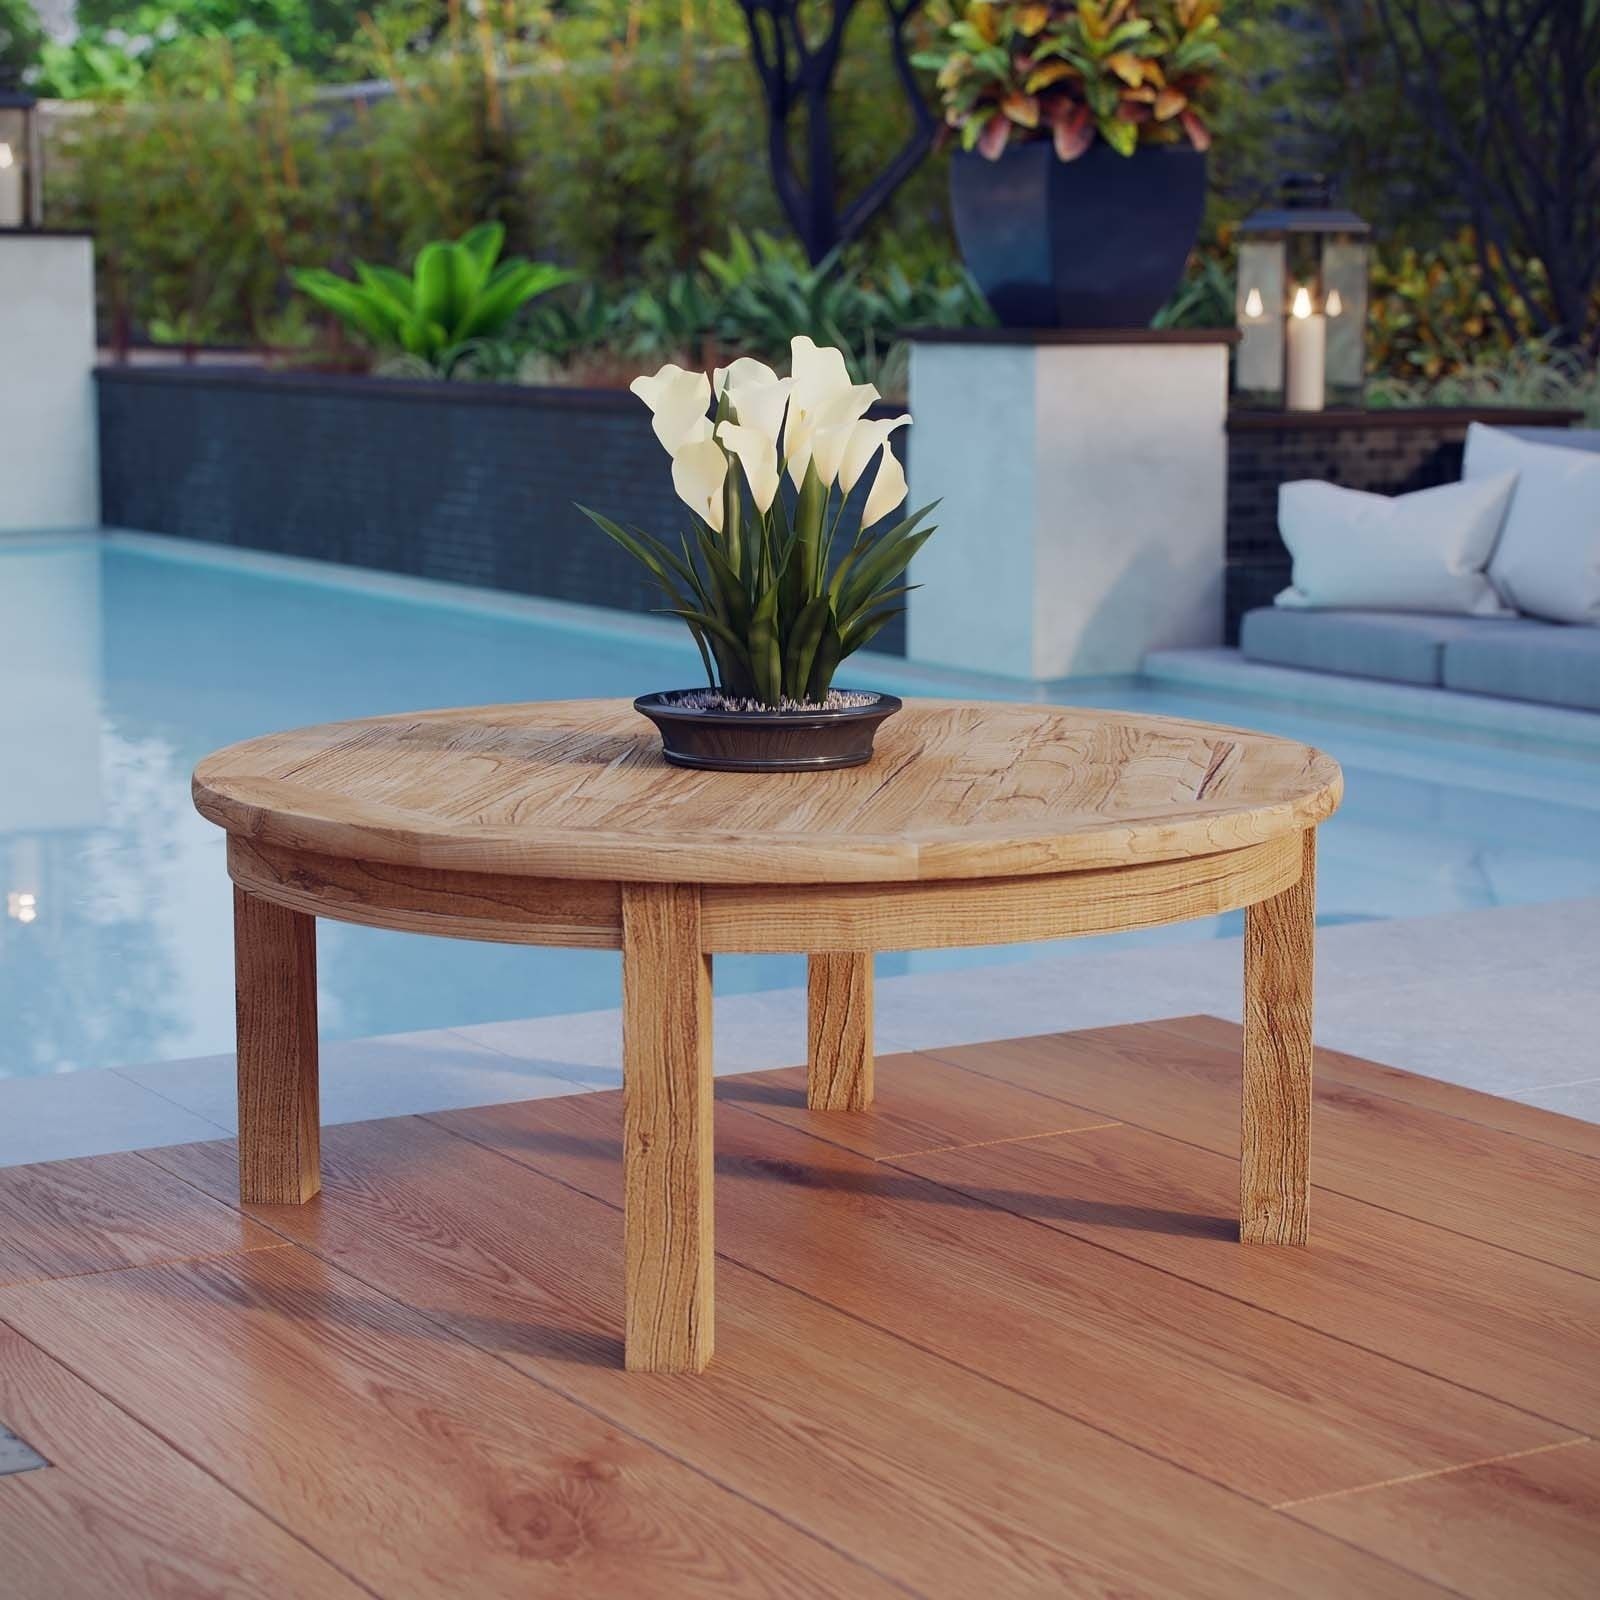 Shop Modway Pier Natural Teak Modern Outdoor Round Patio Coffee Table Inside Modern Outdoor Patio Coffee Tables (View 4 of 20)